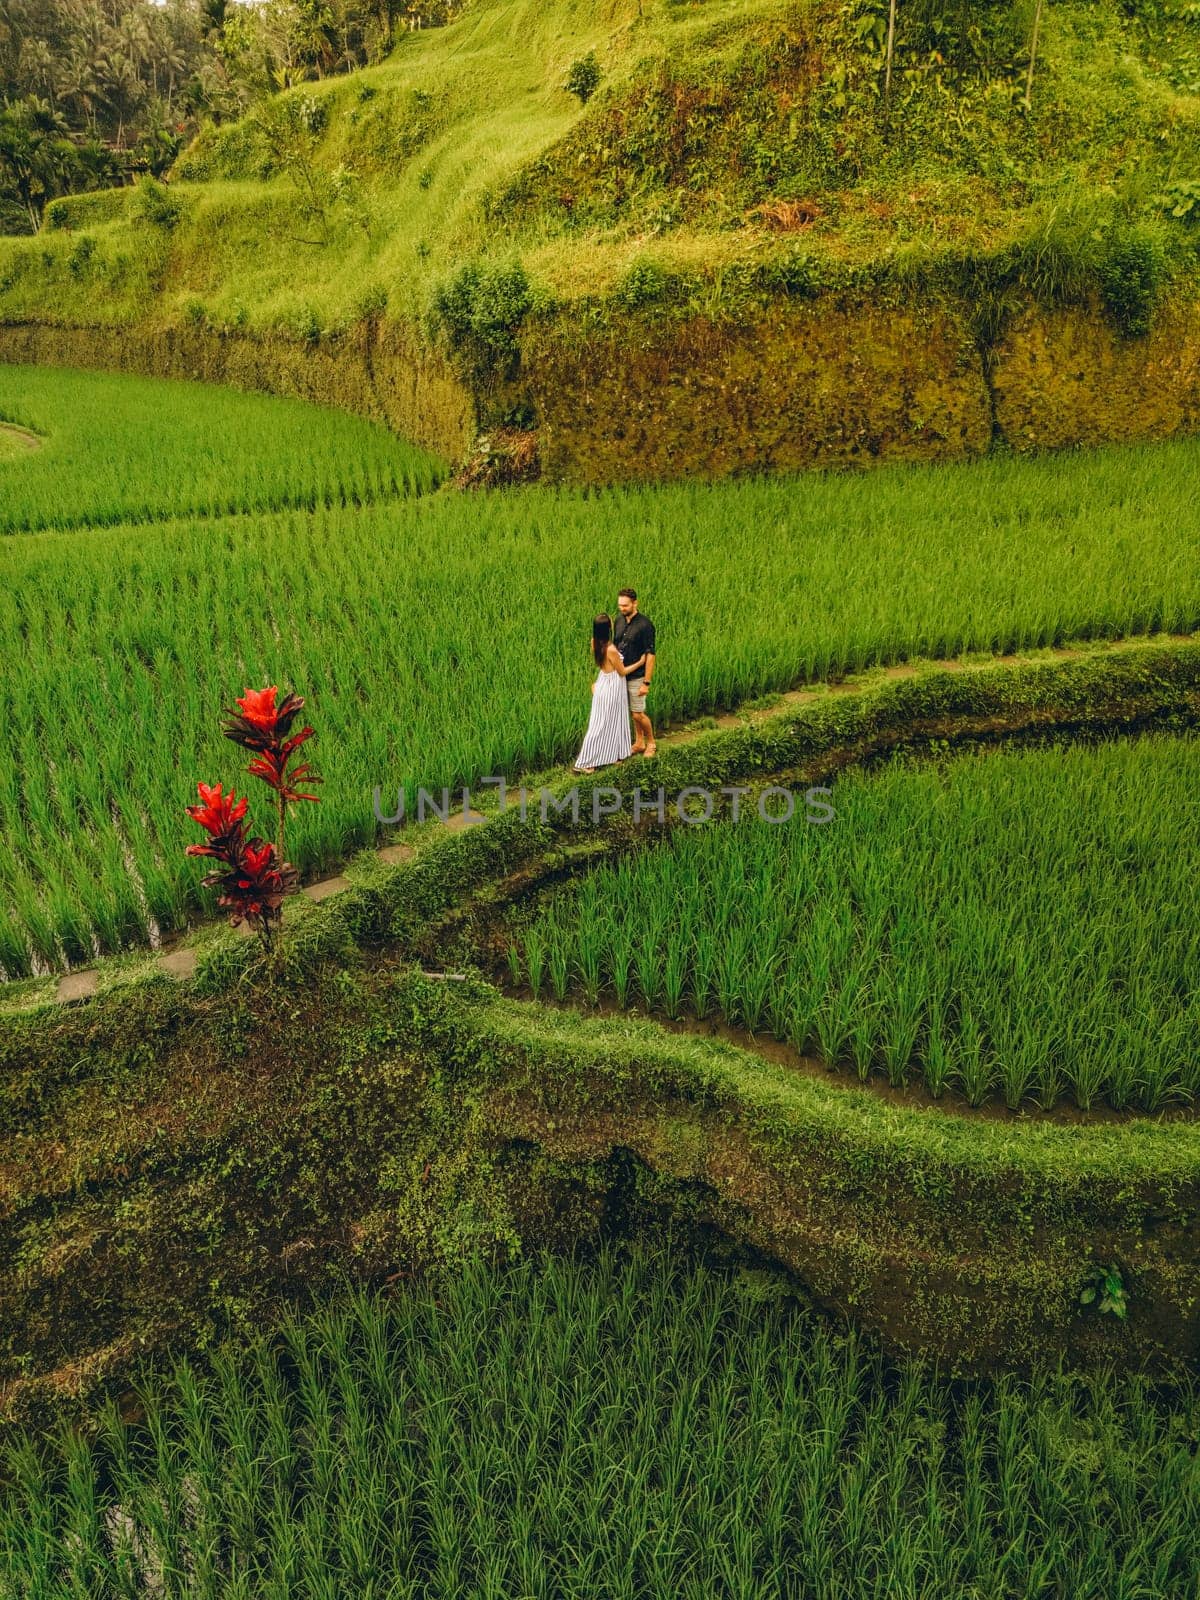 A couple stands in a green field with tall grass, aerial view of Tegallalang Bali rice terraces on Bali, Indonesia by Popov